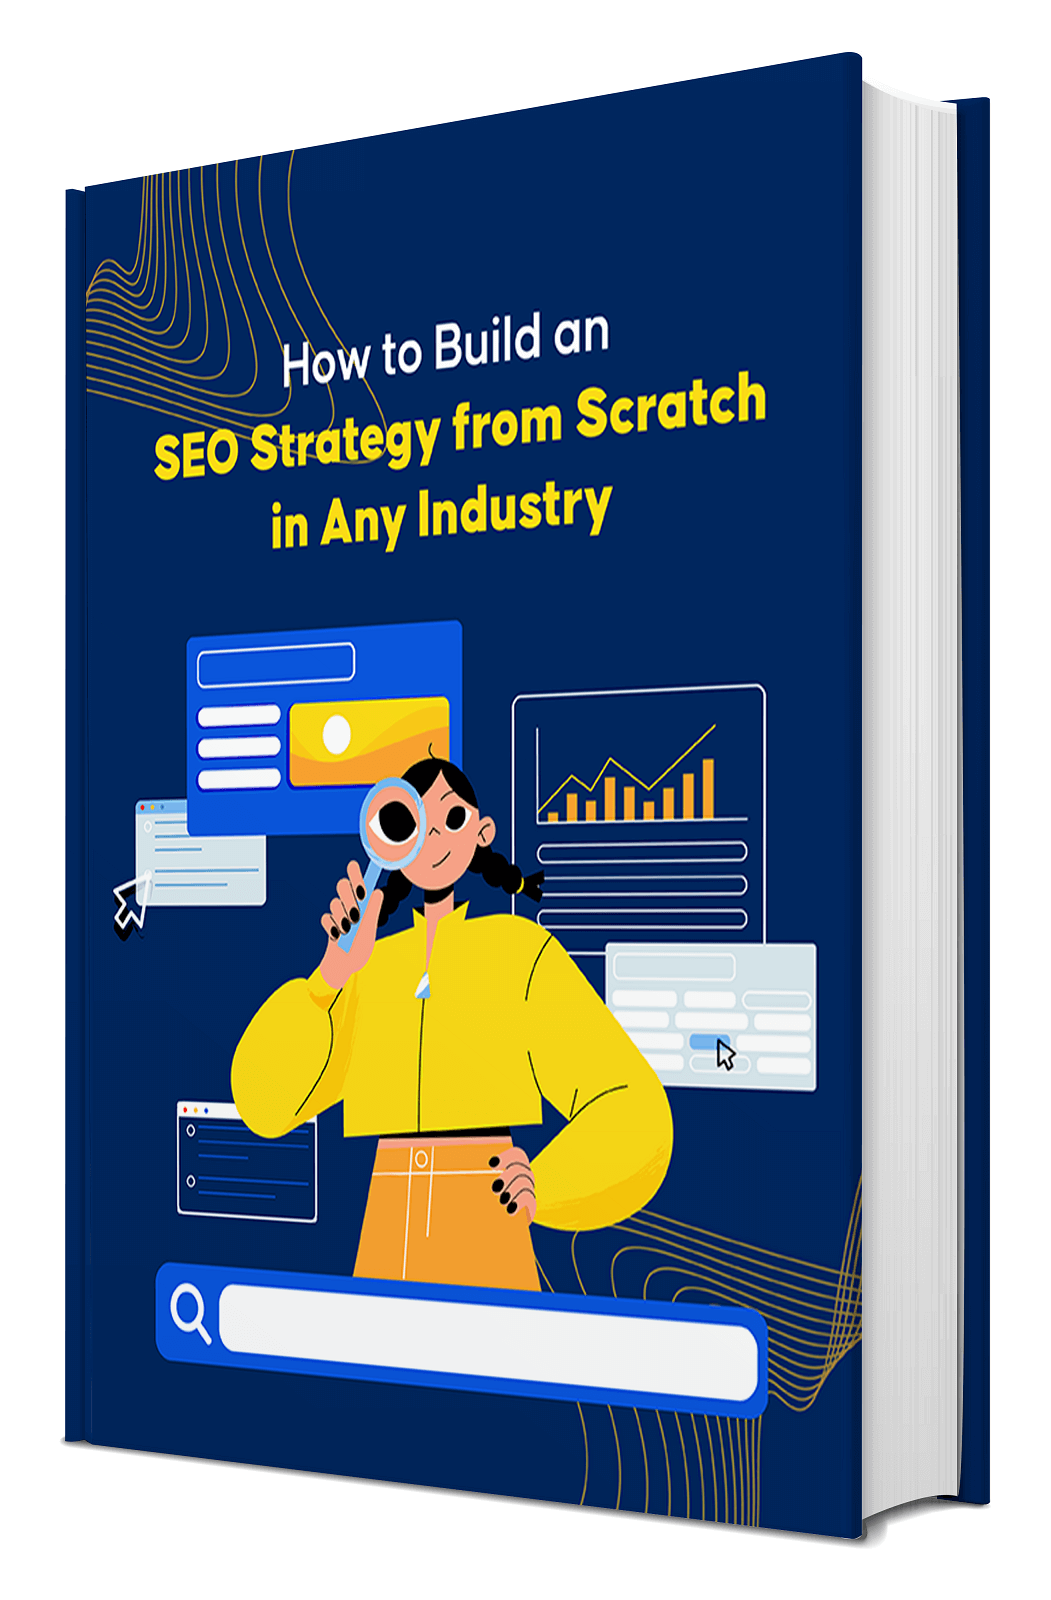 How to Build an SEO Strategy from Scratch in Any Industry - Ebook Cover